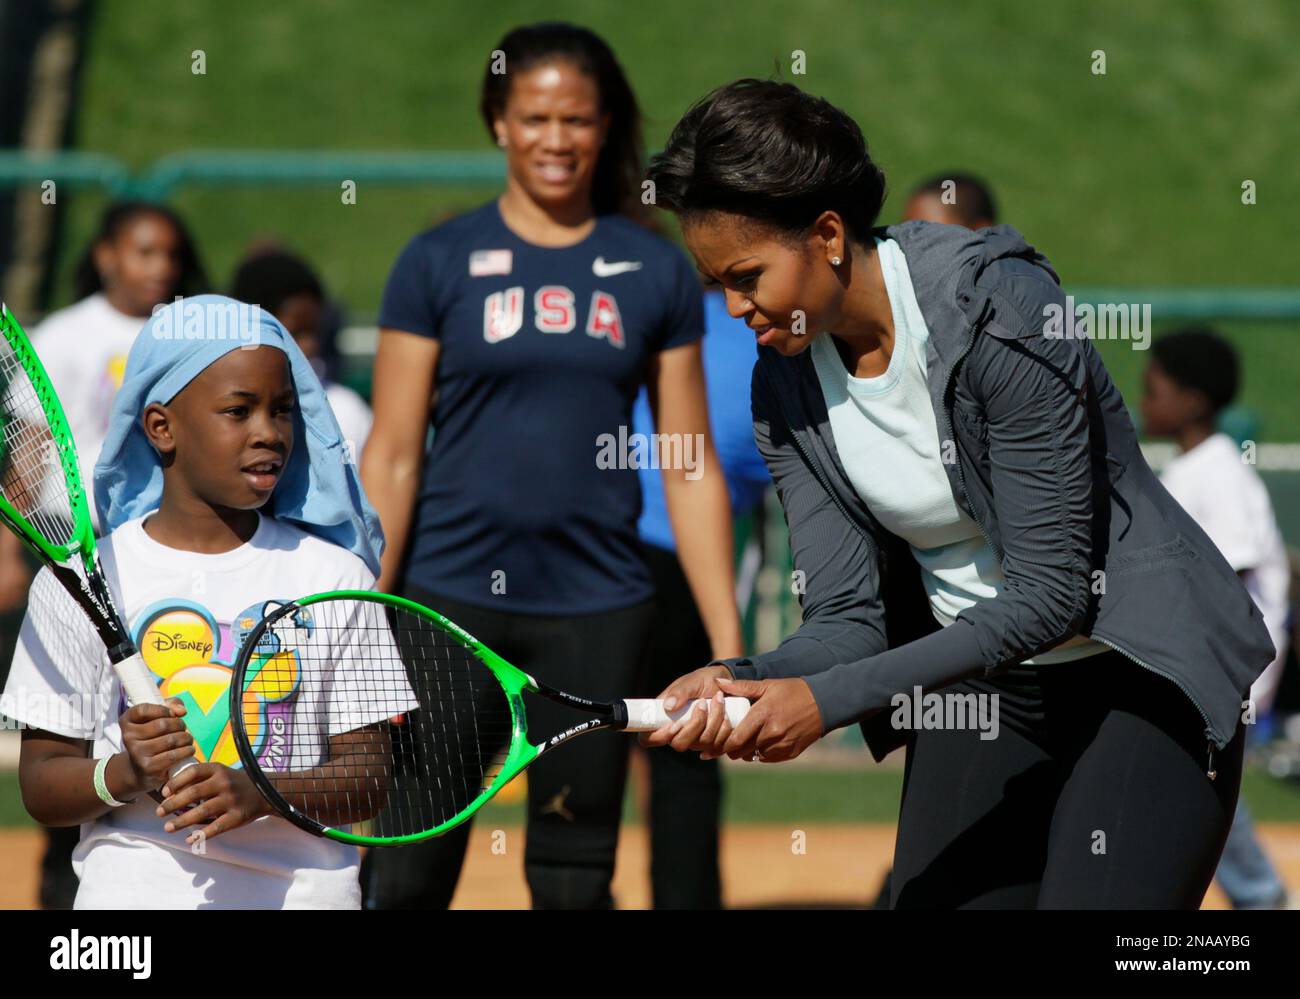 First lady Michelle Obama shows her young tennis partner how to grip a racquet at the ESPN Wide World of Sports Complex at the Walt Disney World Resort, Saturday, Feb